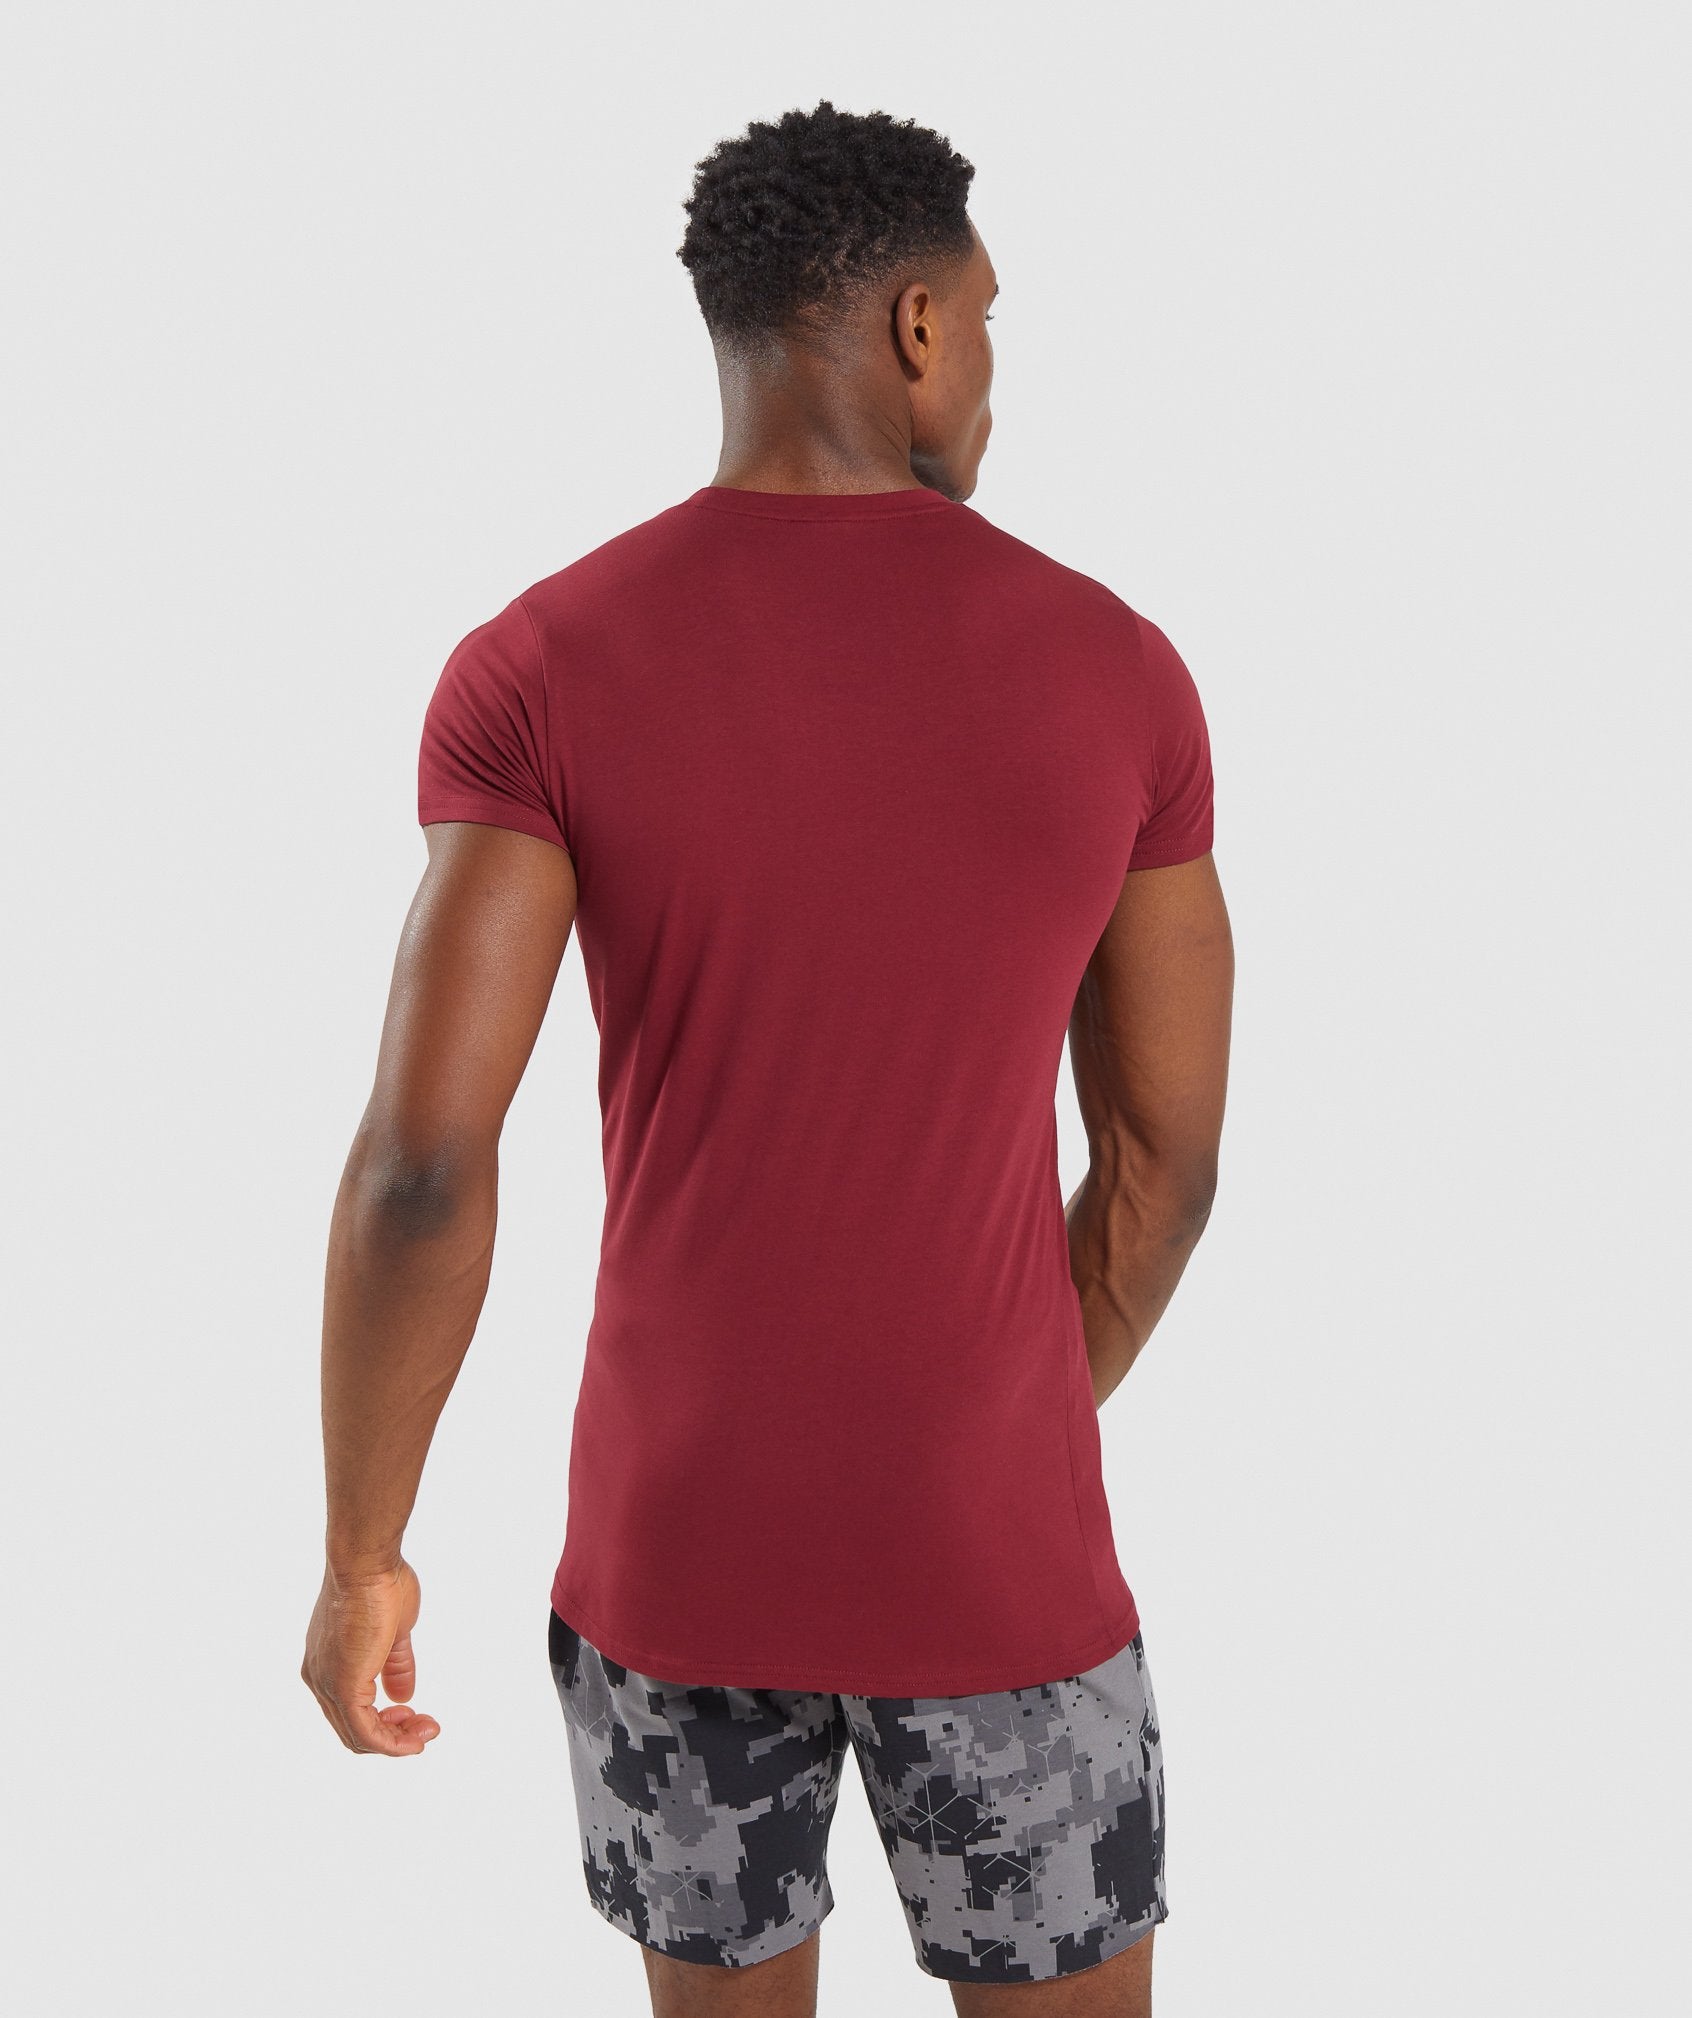 Base T-Shirt in Claret - view 2